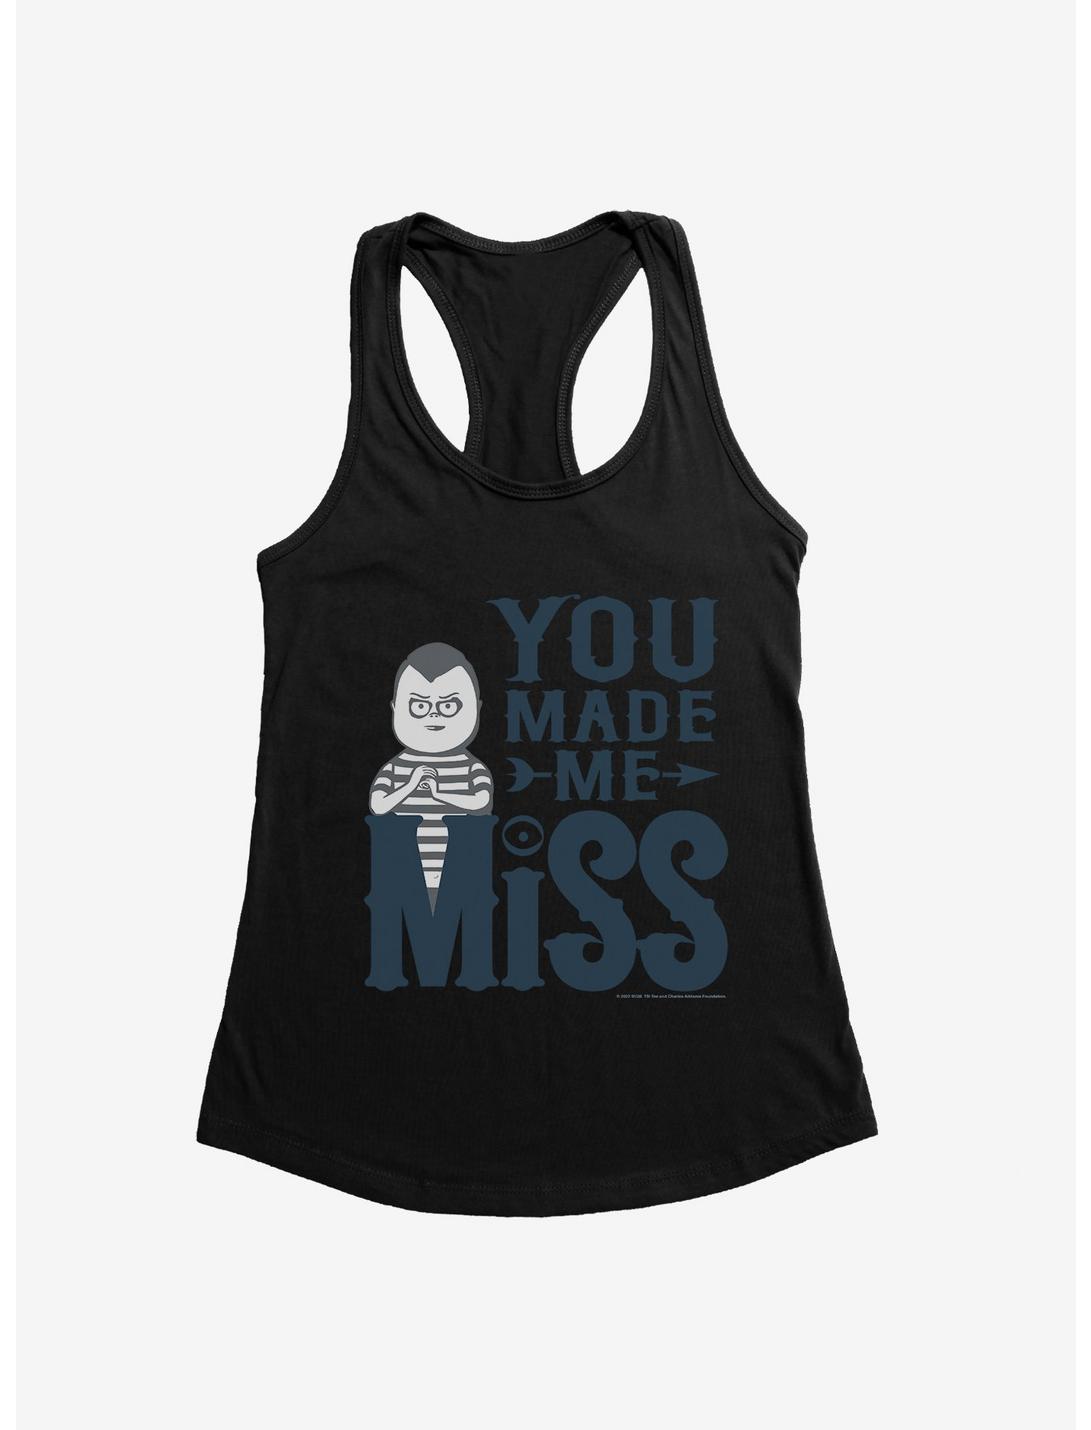 Addams Family You Made Me Miss Womens Tank Top, BLACK, hi-res